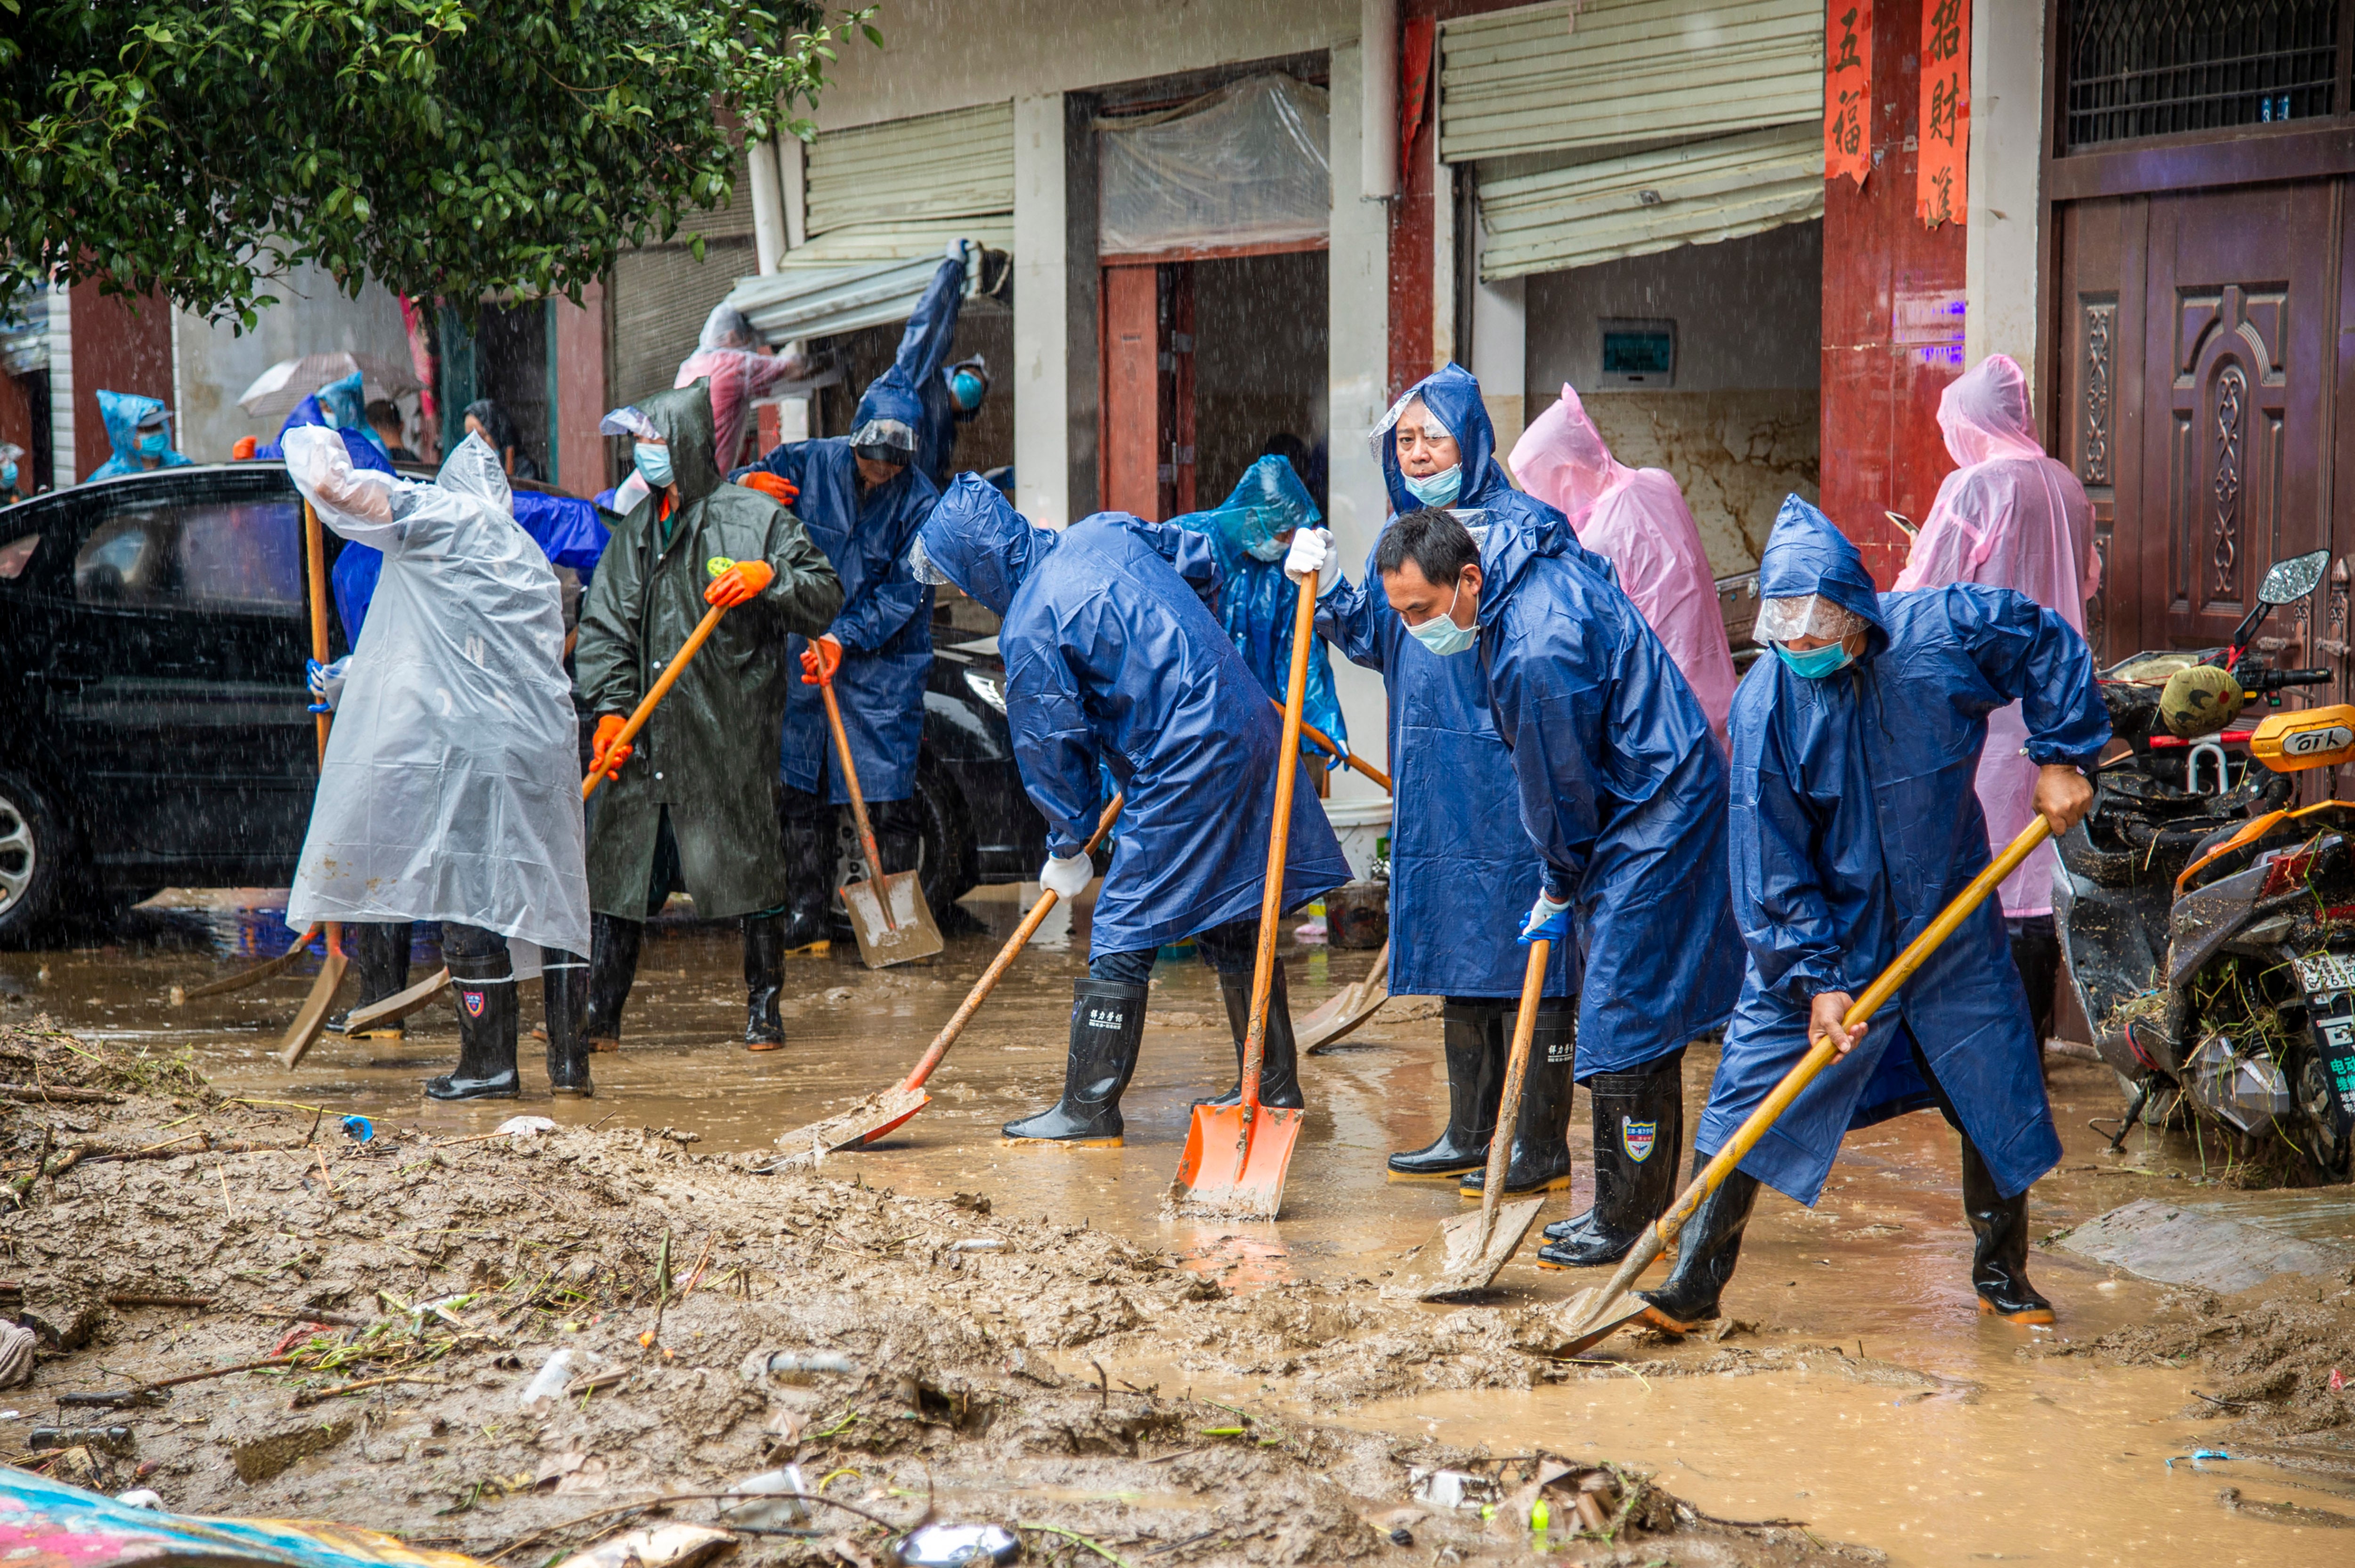 People shovel debris and mud from a road in Liulin Township of Suixian County in central China's Hubei Province as flooding in central China continued to cause havoc in both cities and rural areas, with authorities saying Friday that more than 20 people had been killed and another several were missing